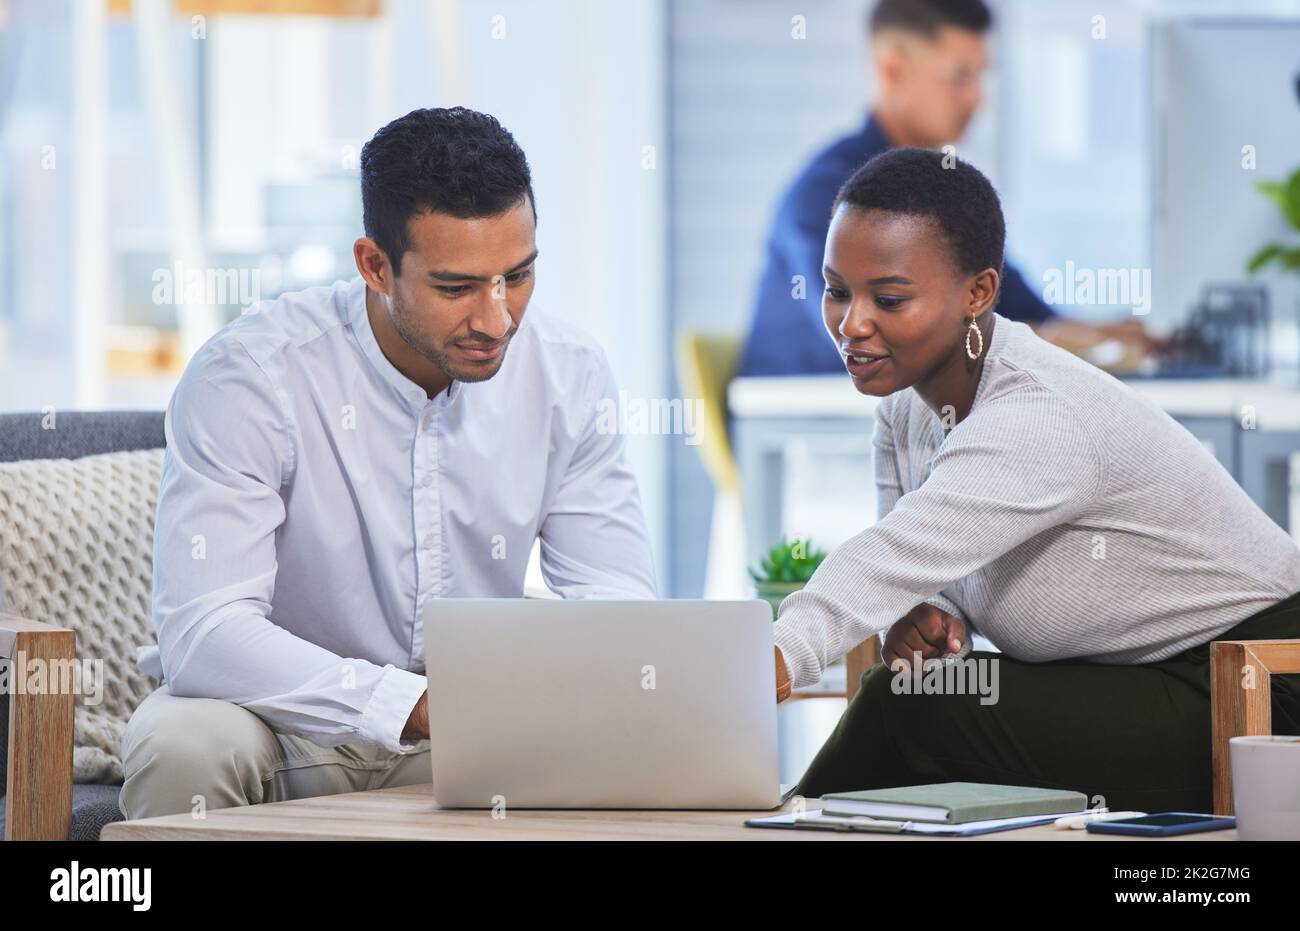 Id go with this one. Shot of two businesspeople discussing something on a laptop while sitting together in an office. Stock Photo